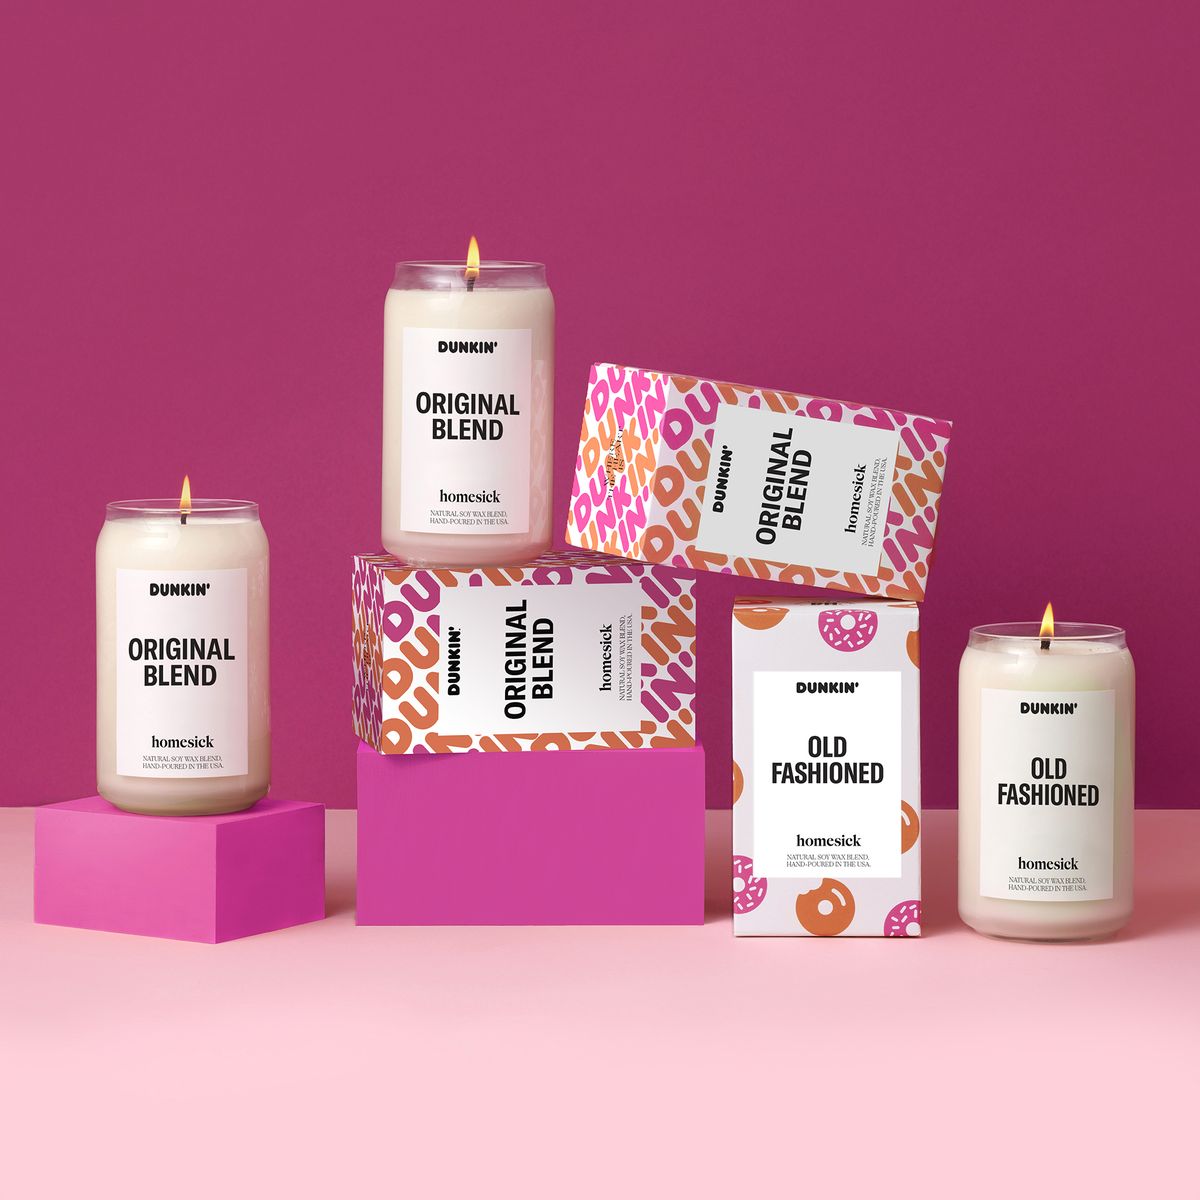 dunkin x homesick candles original blend and old fashioned scents with orange and pink packaging